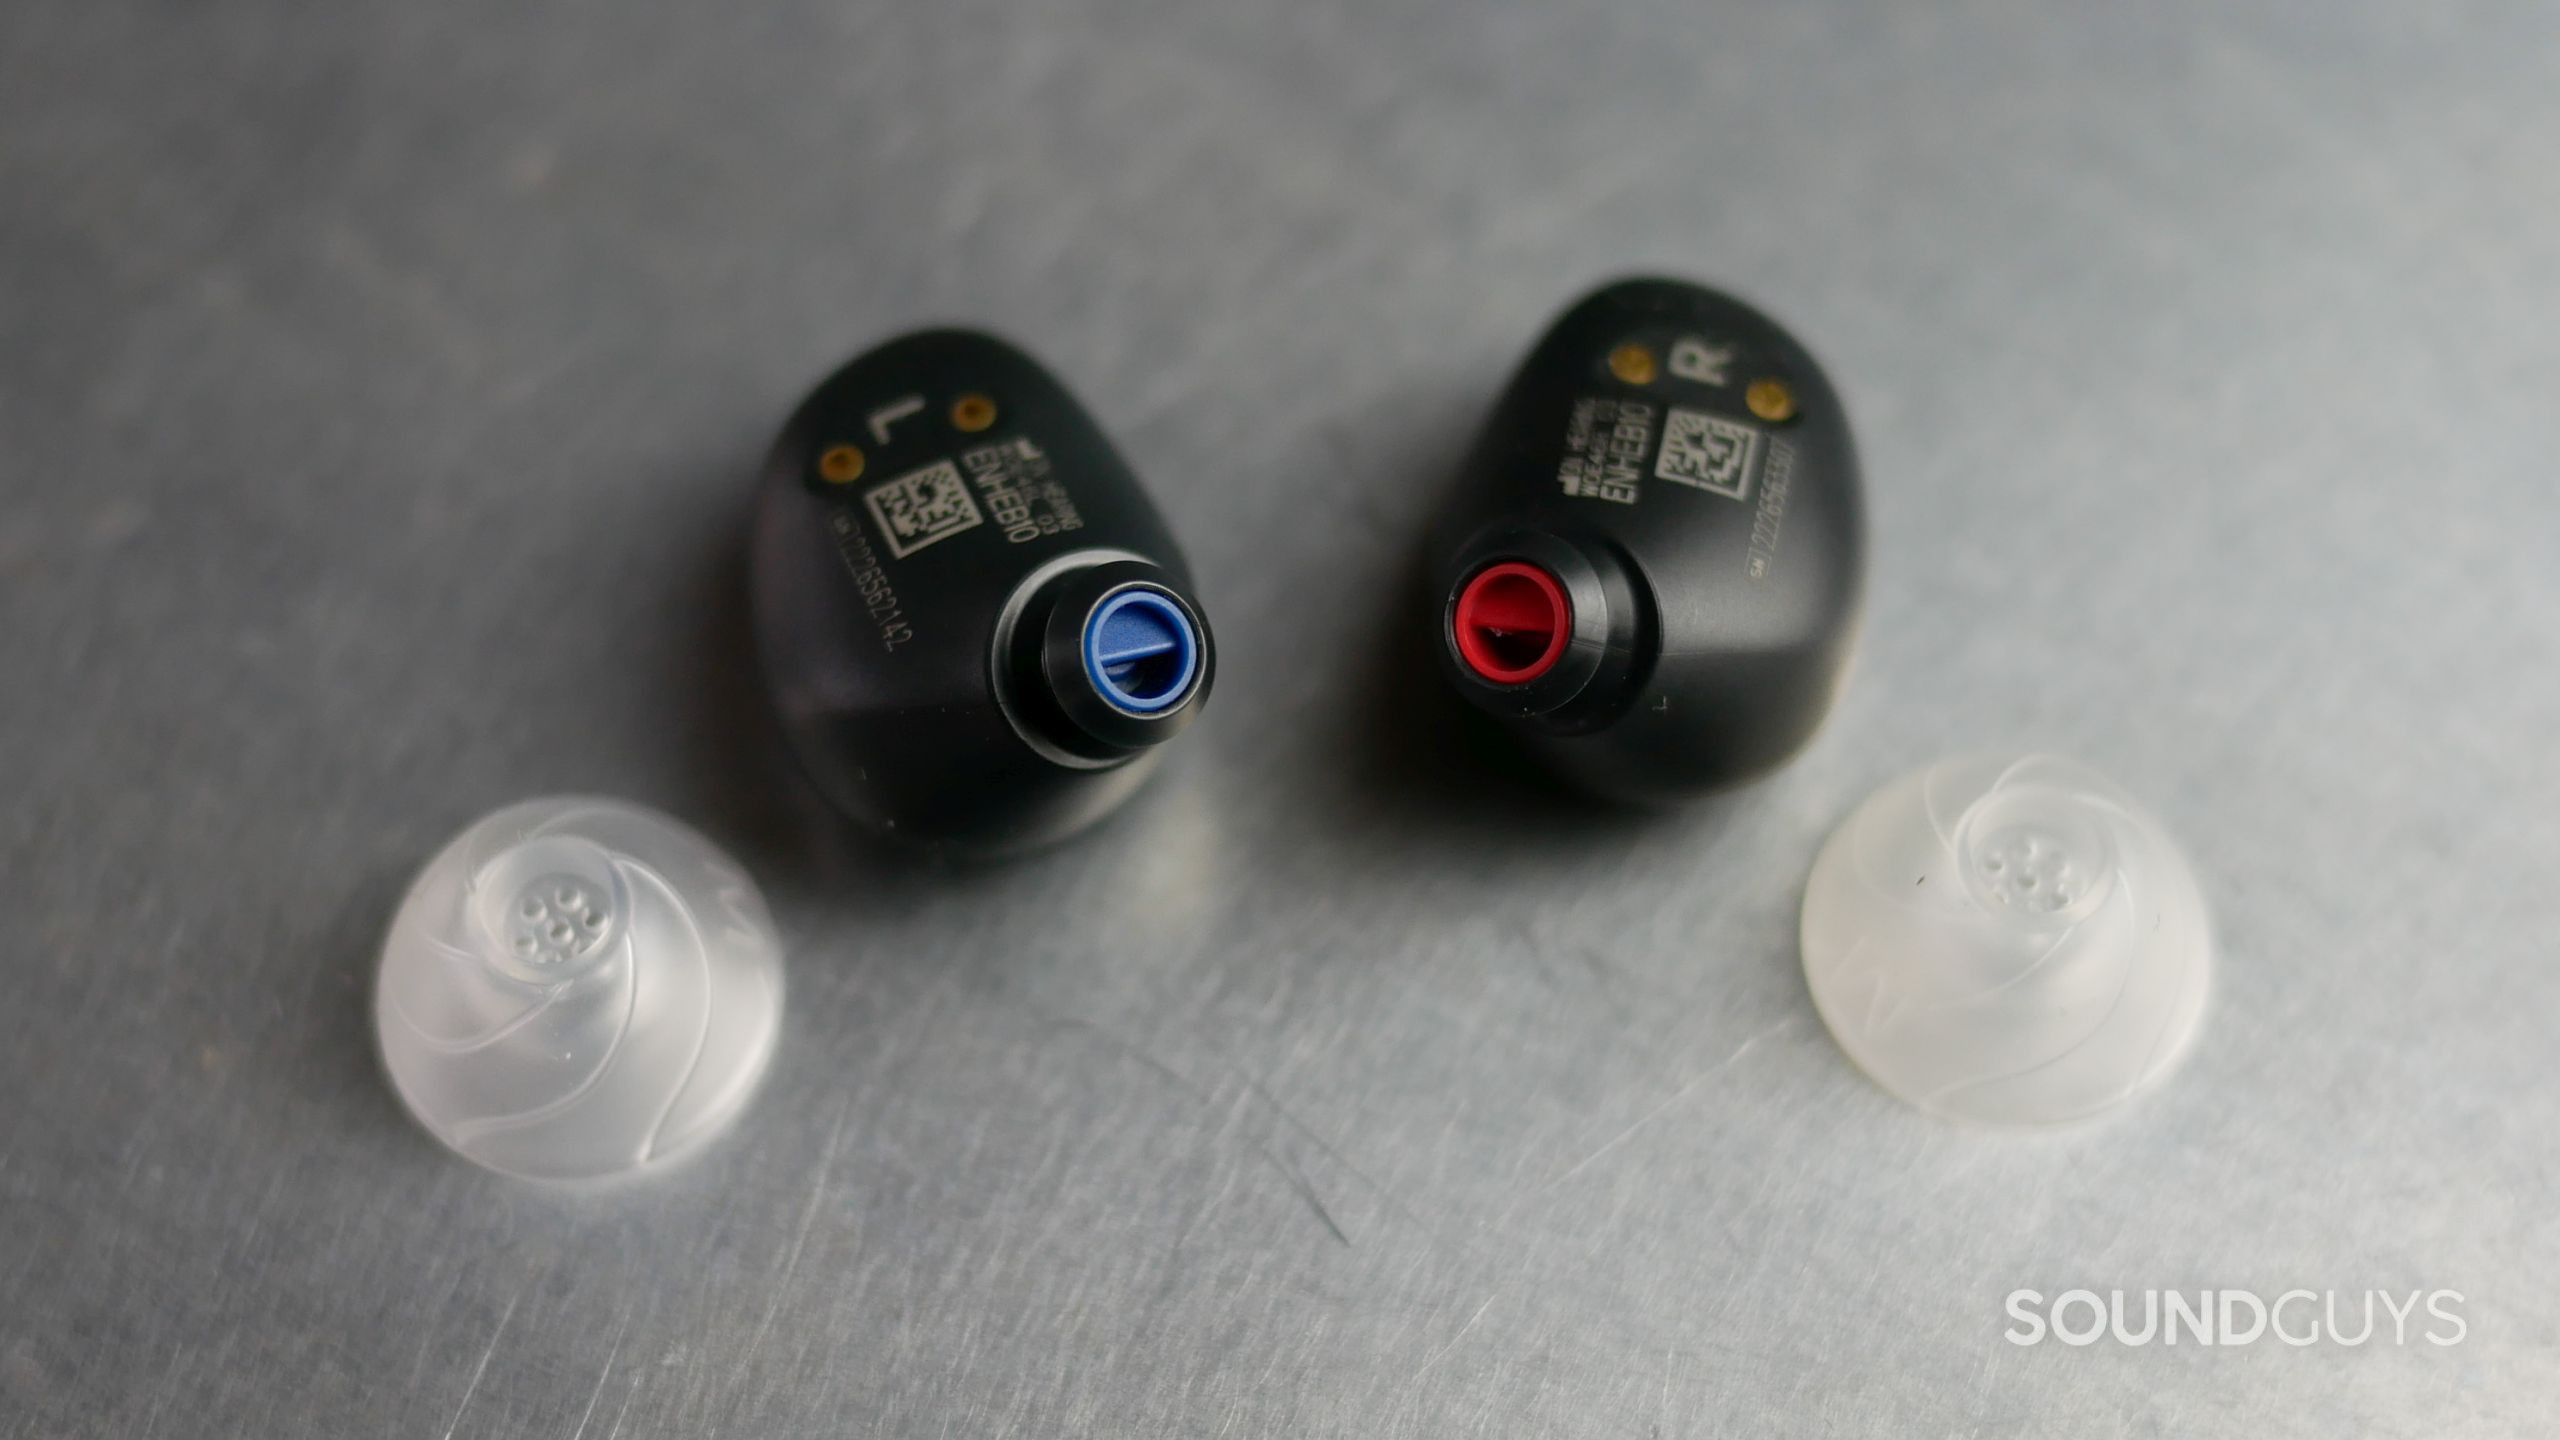 Jabra Enhance Plus earbuds with silicone tips removed to highlight left/right blue/red color coding.